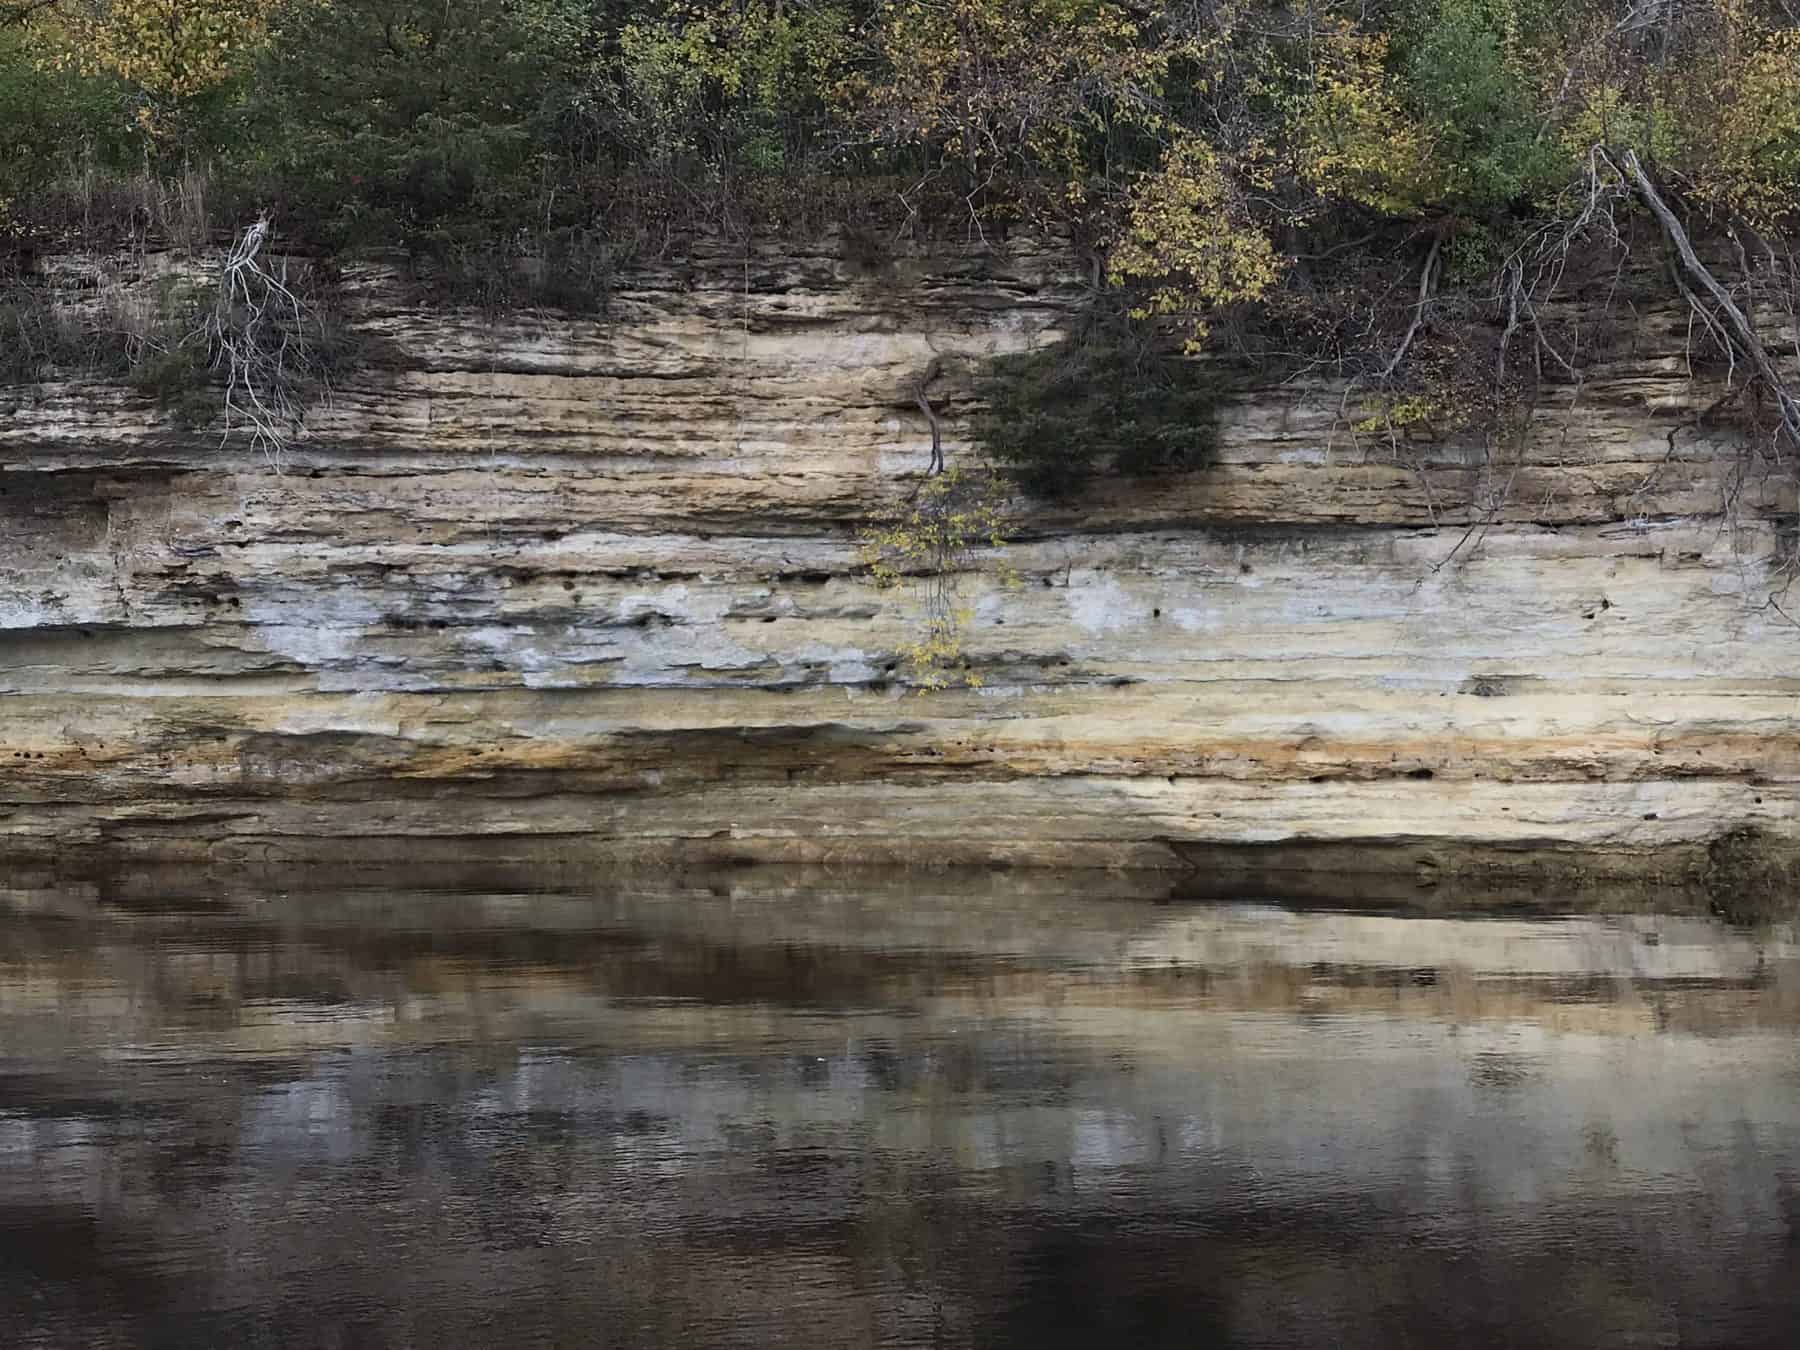 The palette of the river bluffs. (Photo Credit: Sophia Patane, Wild Rivers Conservancy)